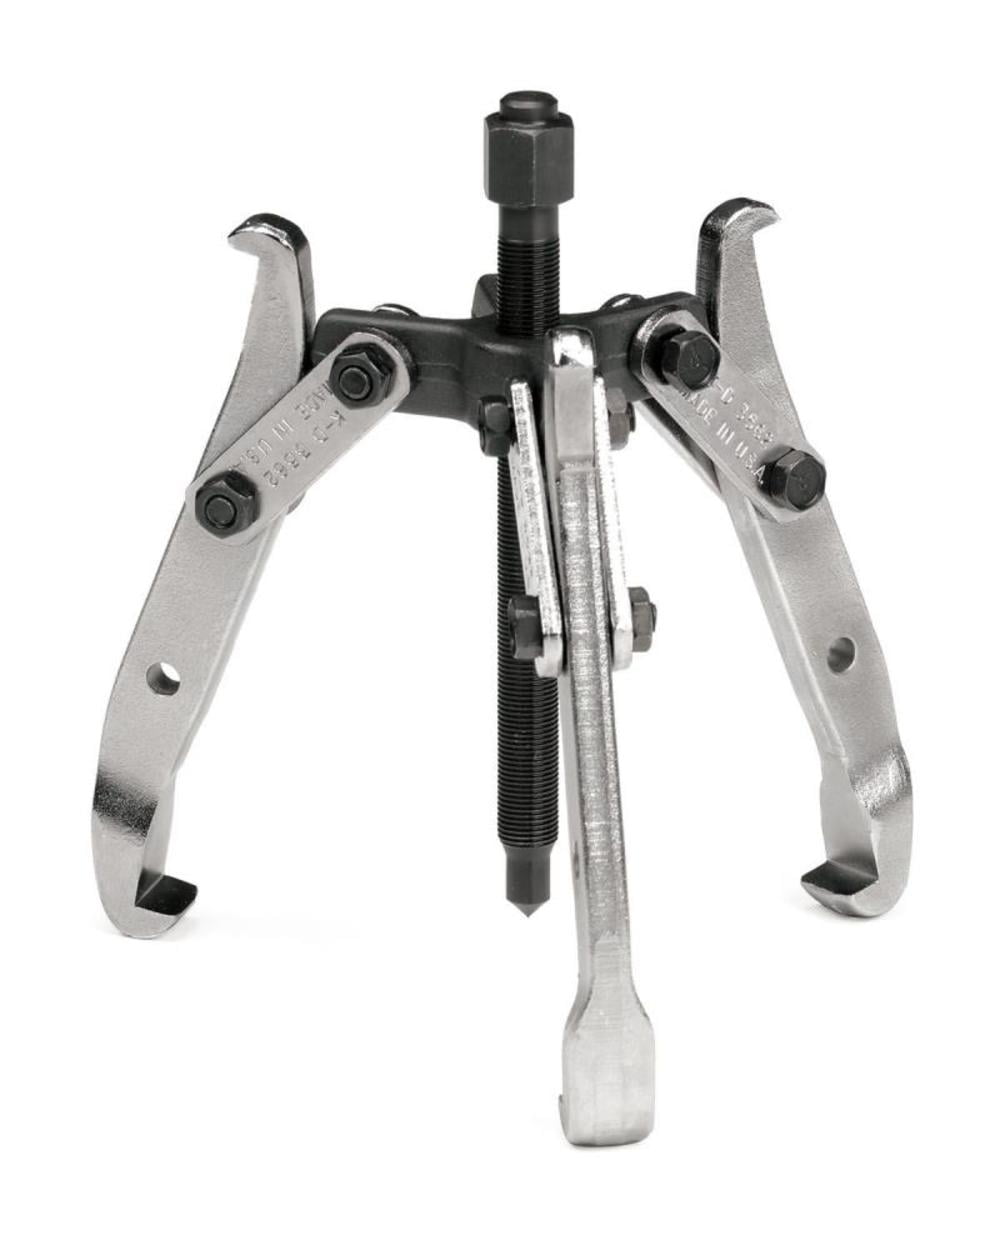 Picture of Apex Tool Group 3561 1.5 in. 2 Ton Reversible Puller